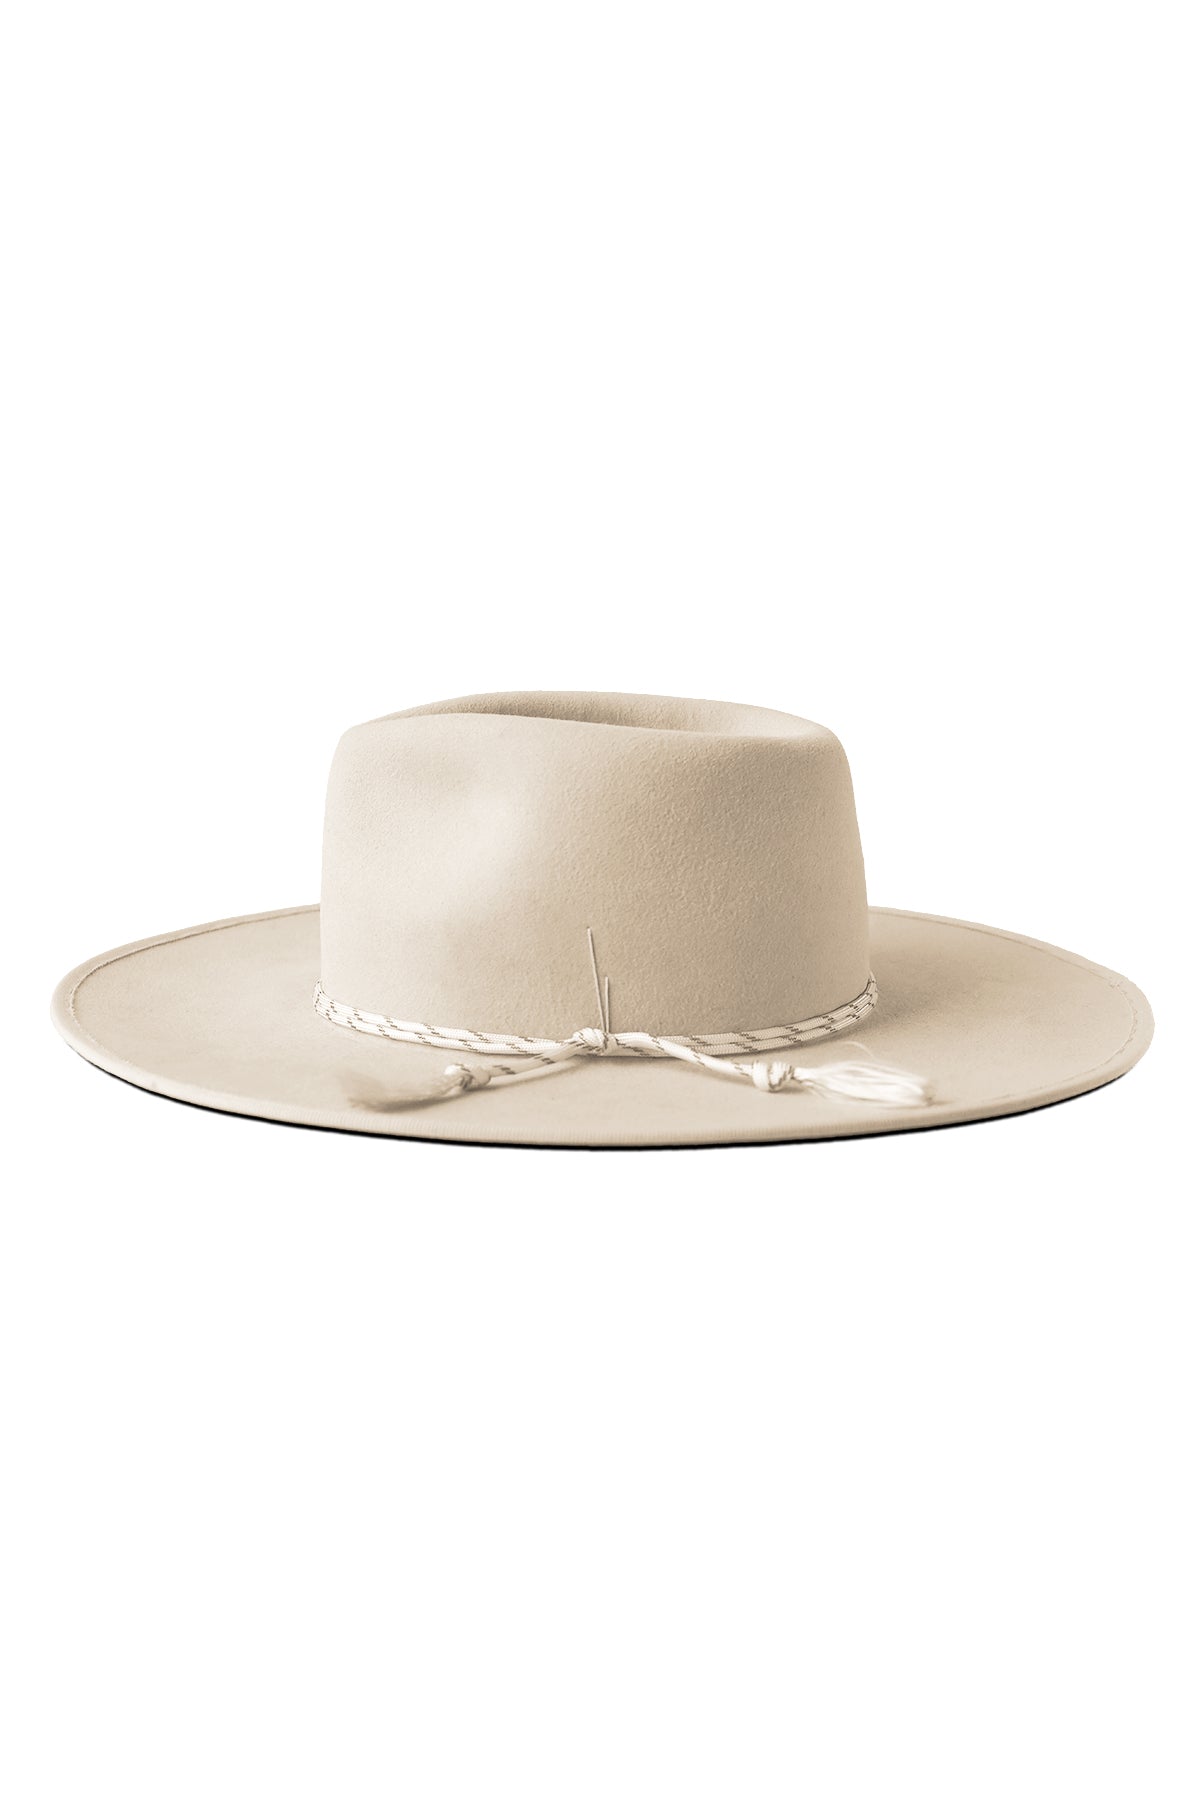 Light beige fur felt fedora hat with a wide brim and paracord. Unisex hat style in various sizes and colors. We ship worldwide. Shop now. Each SoonNoon hat is handmade with unique character in Stockholm, Sweden.